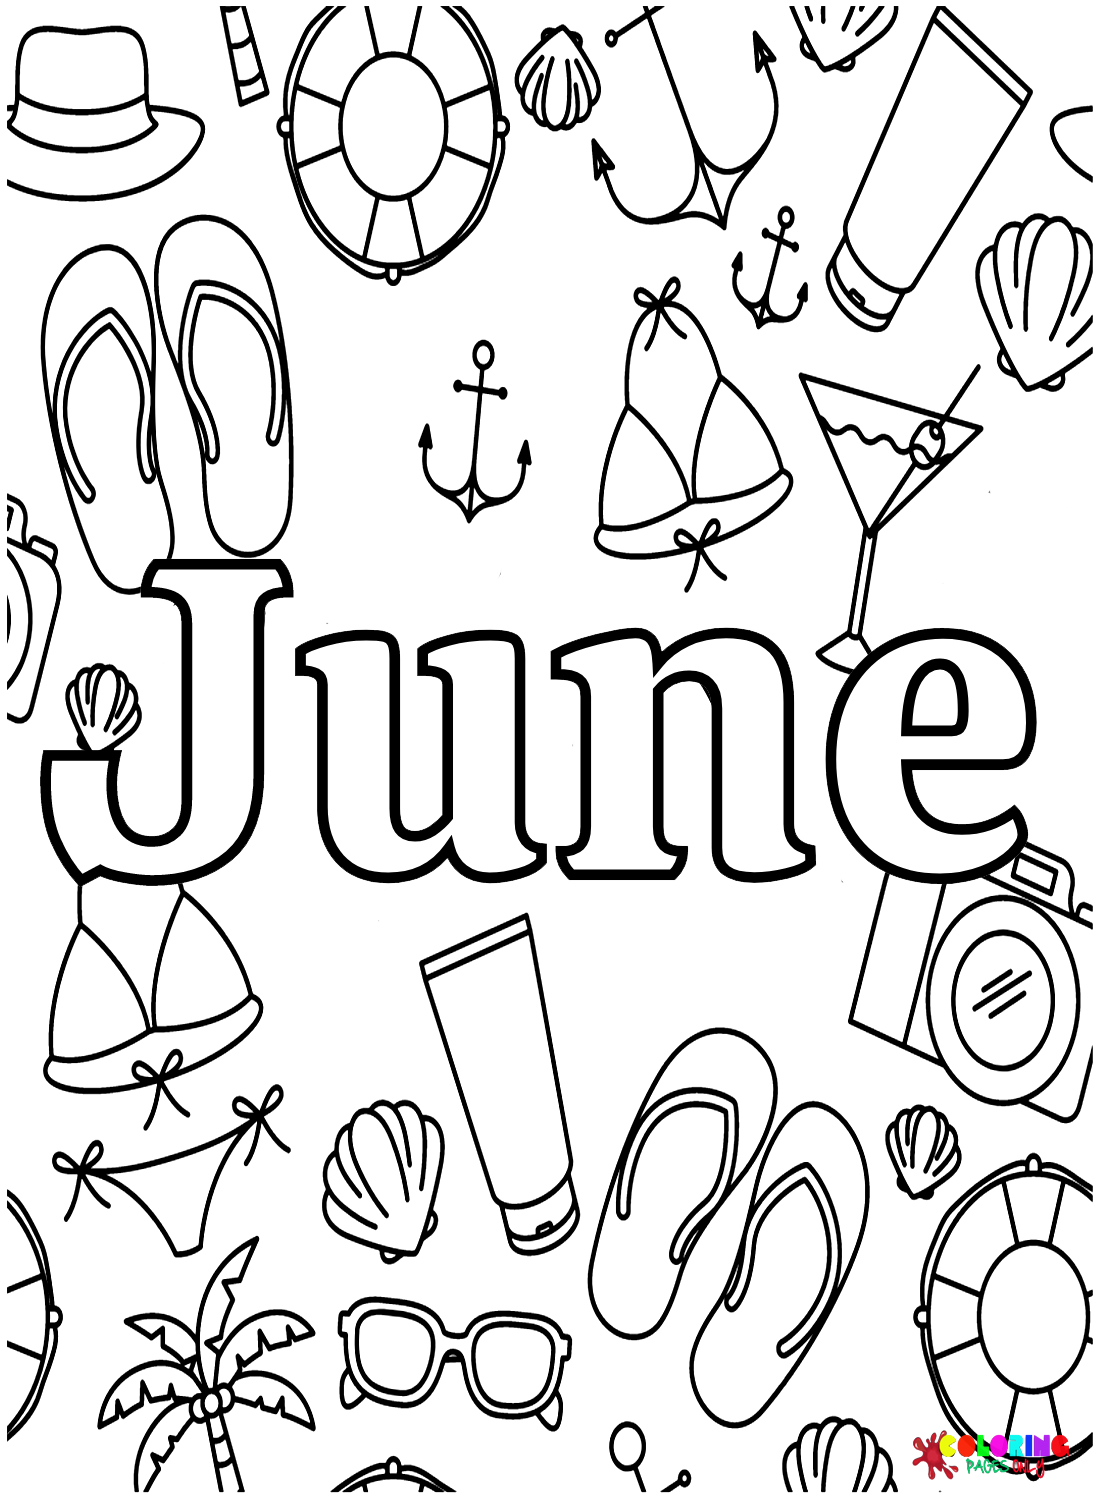 Summer June Coloring Page - Free Printable Coloring Pages